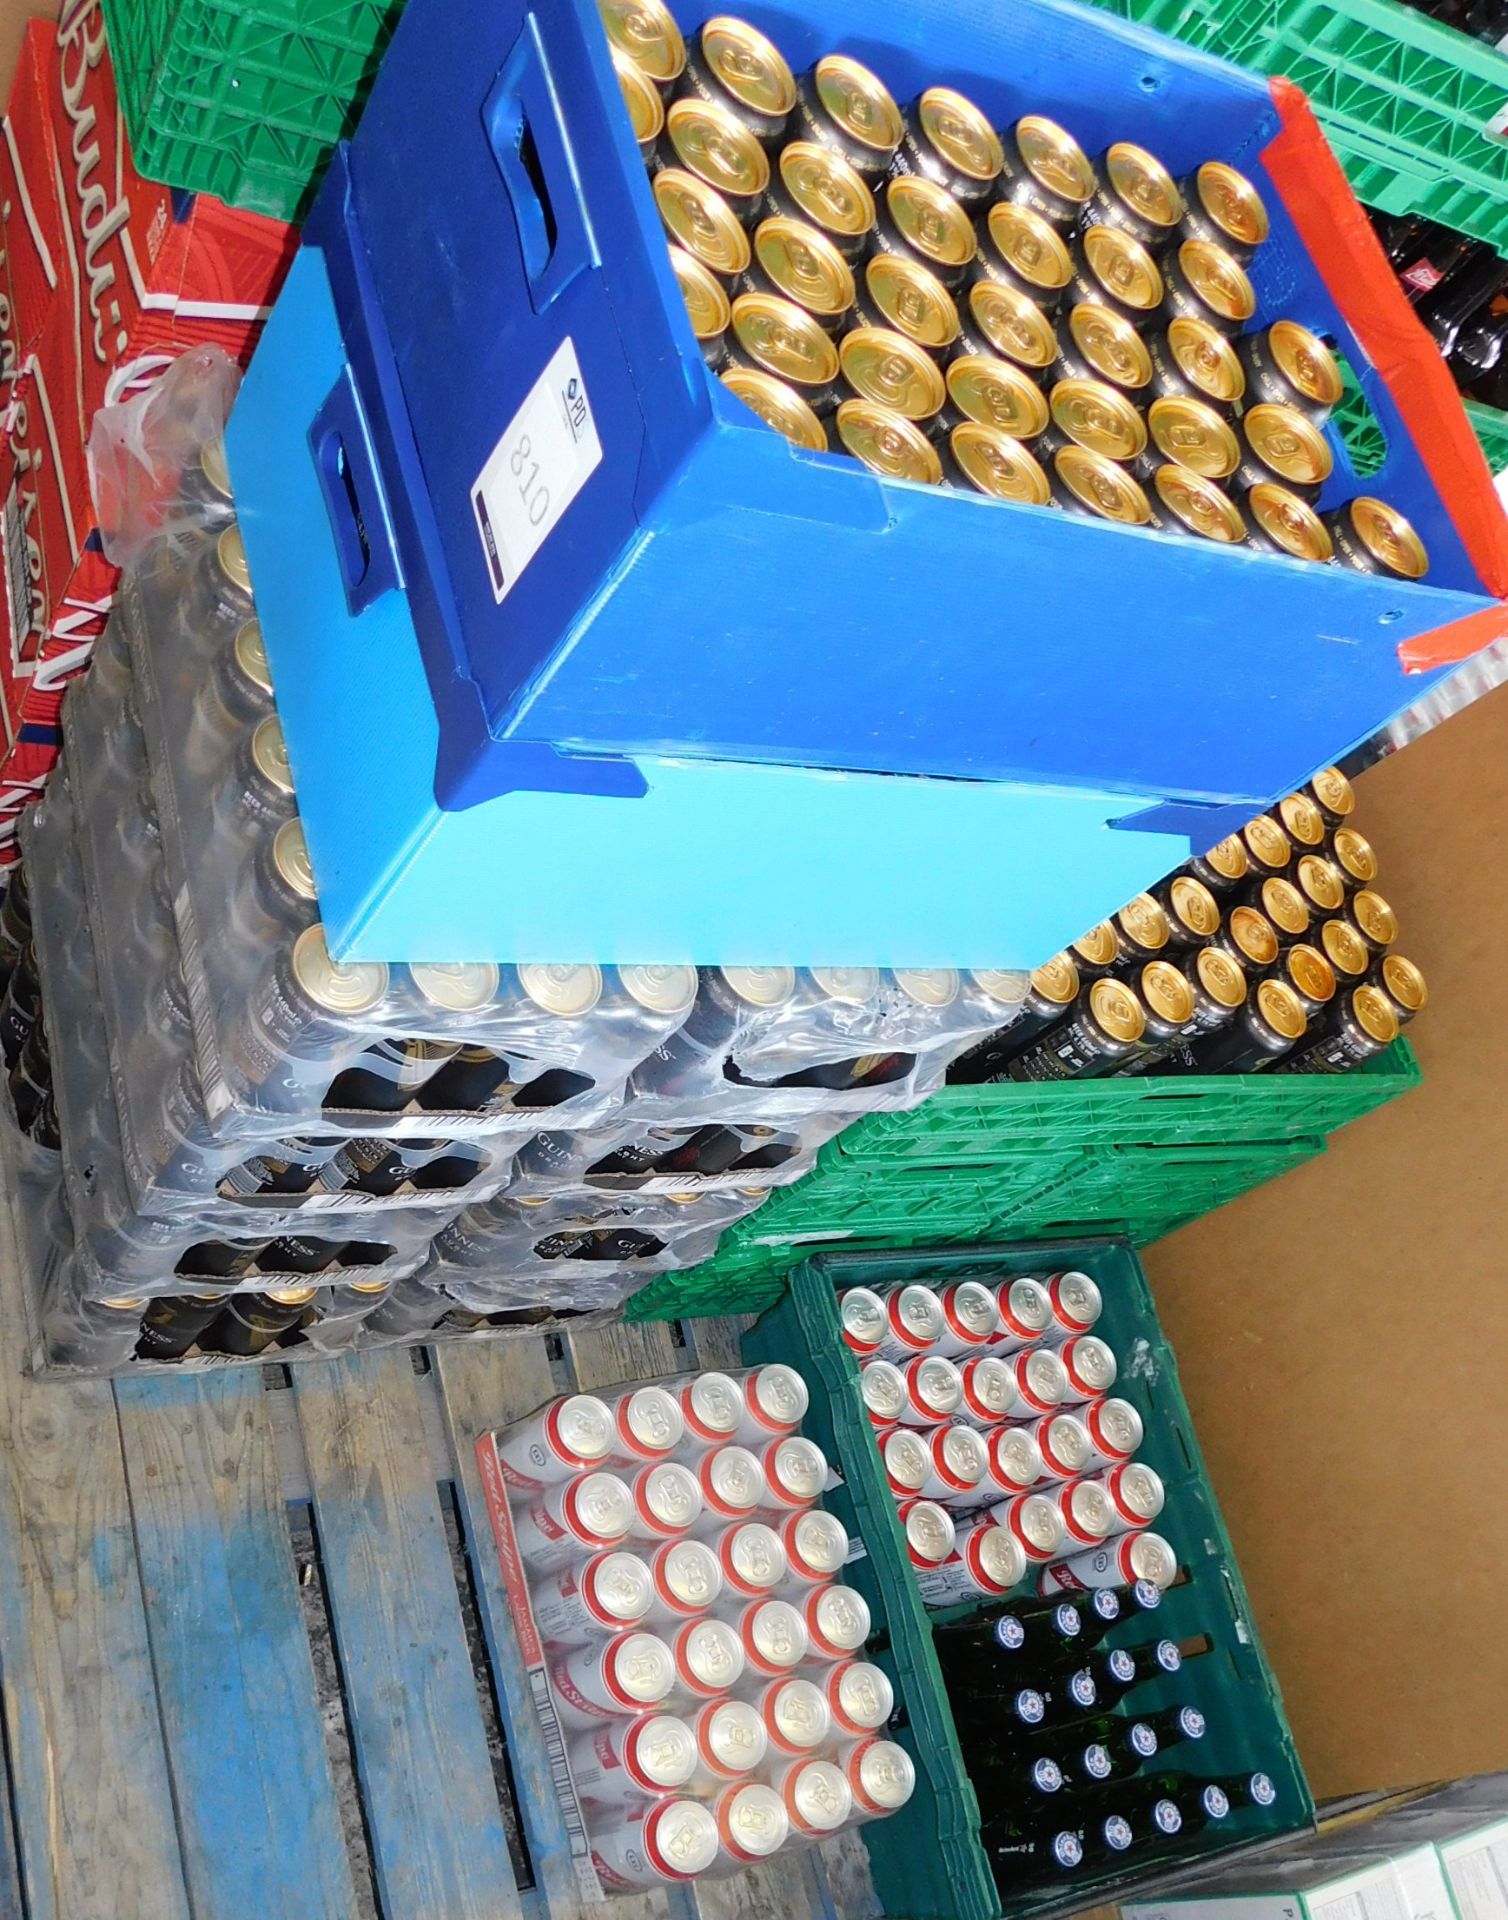 Contents of Pallet to Include 390 Cans of Guinness, 440ml, 45 Cans of Red Stripe, 440ml & 17 Bottles - Image 2 of 2